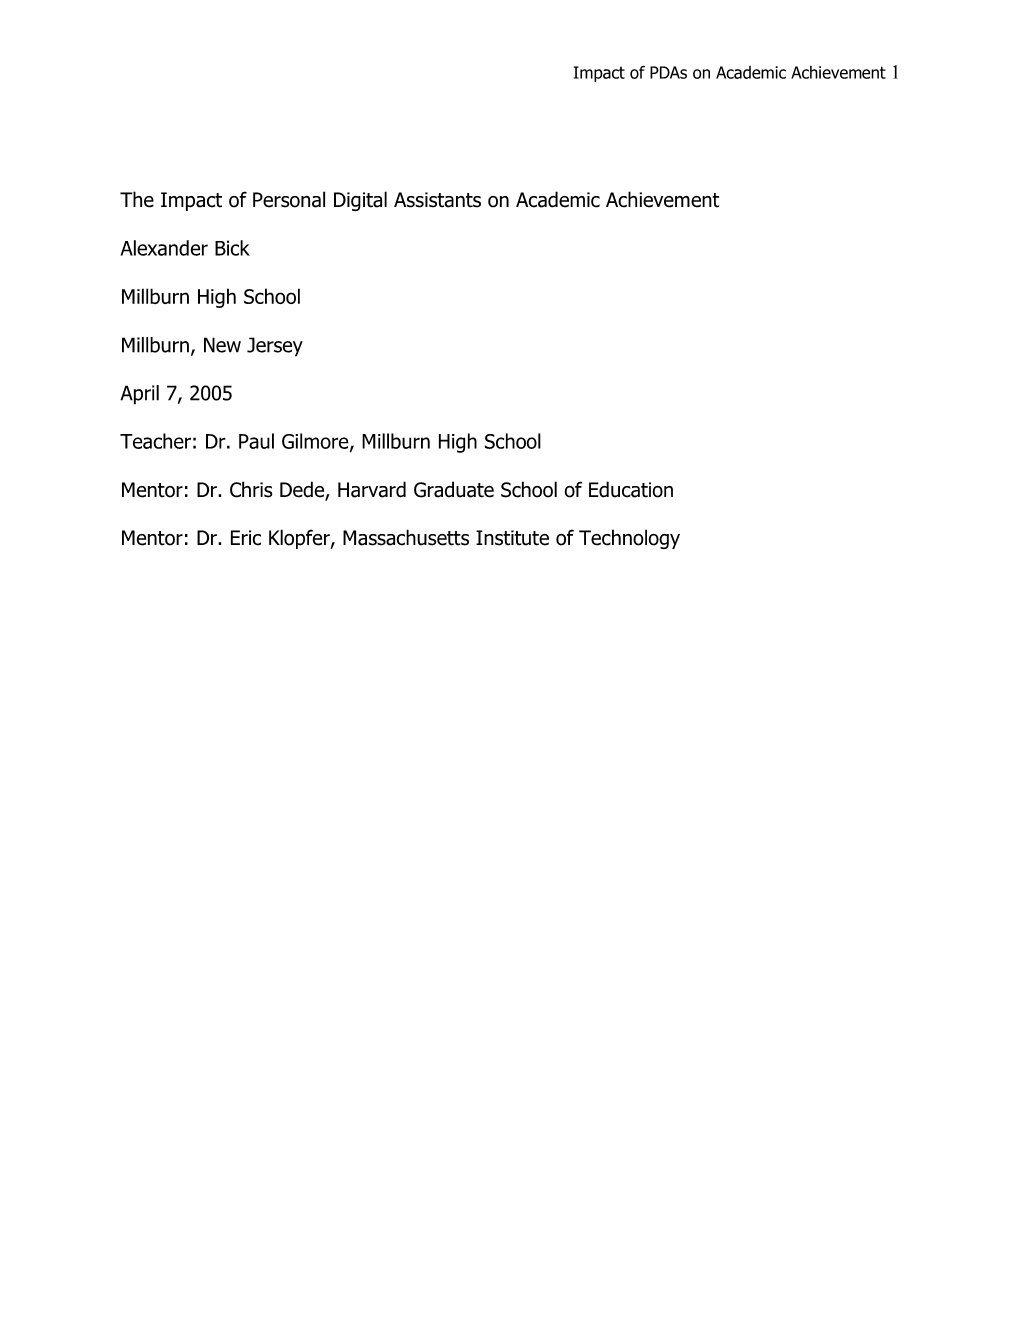 The Impact of Personal Digital Assistants on Academic Achievement